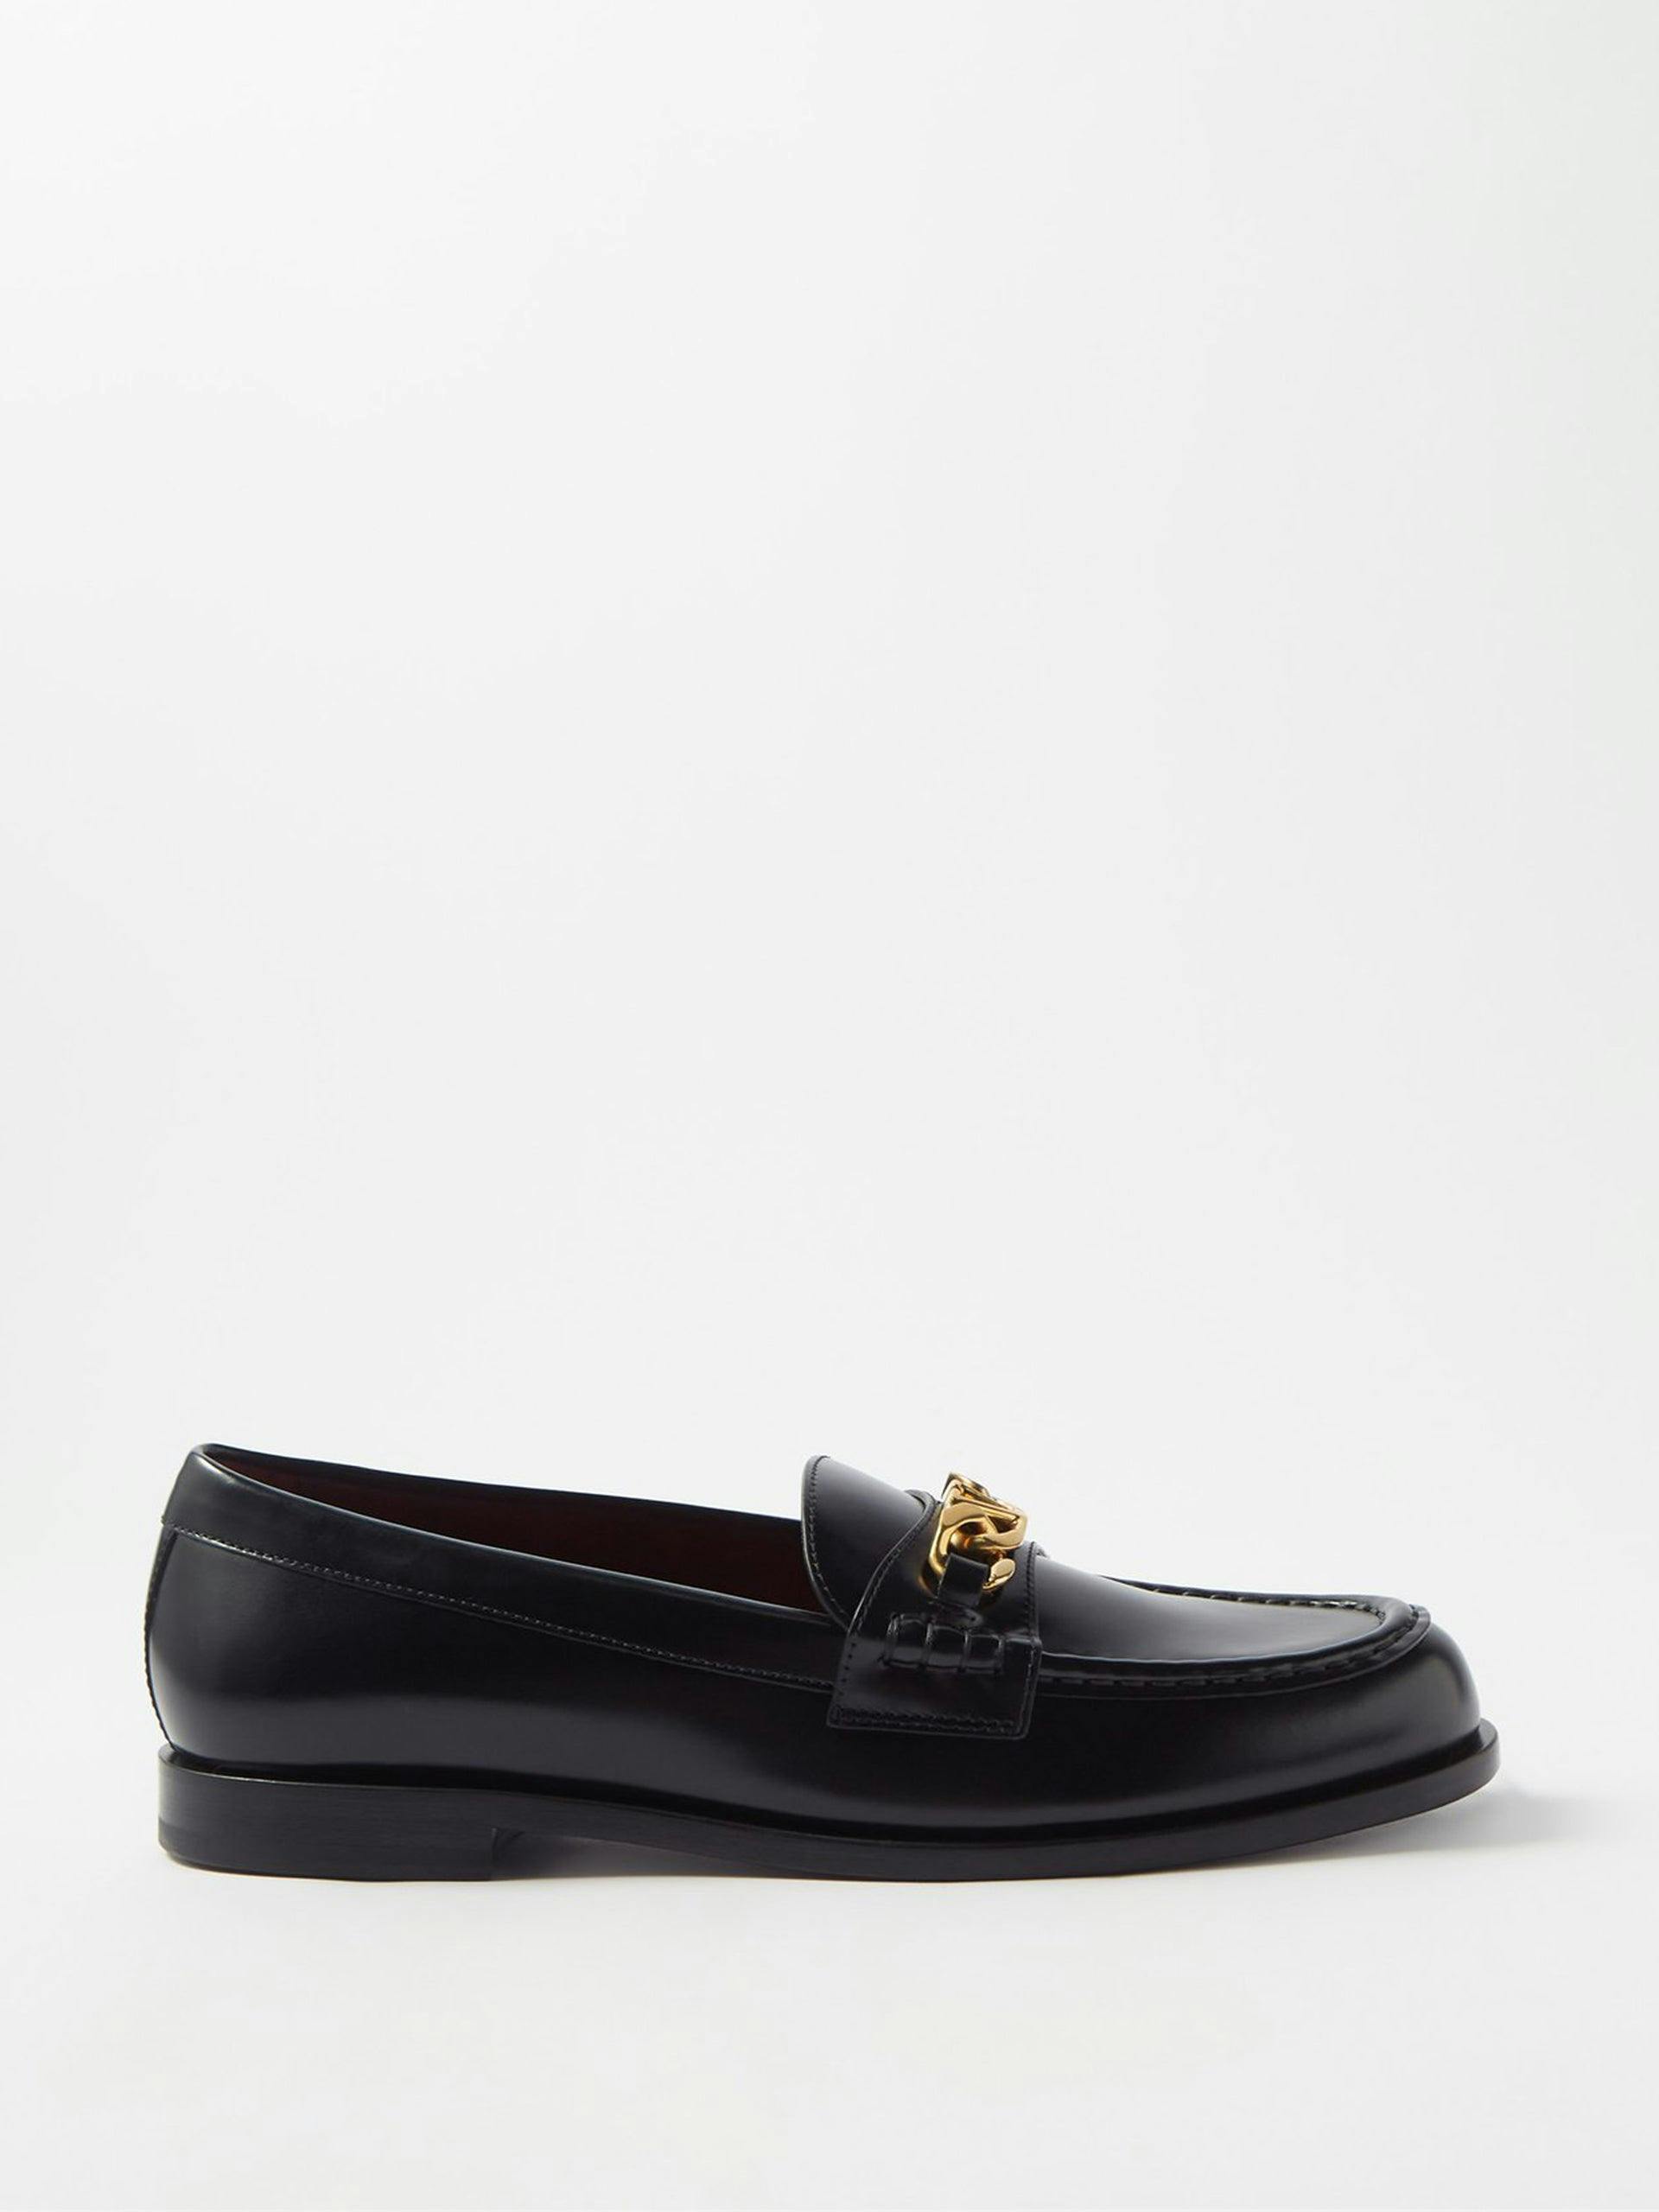 V-Logo chain leather loafers